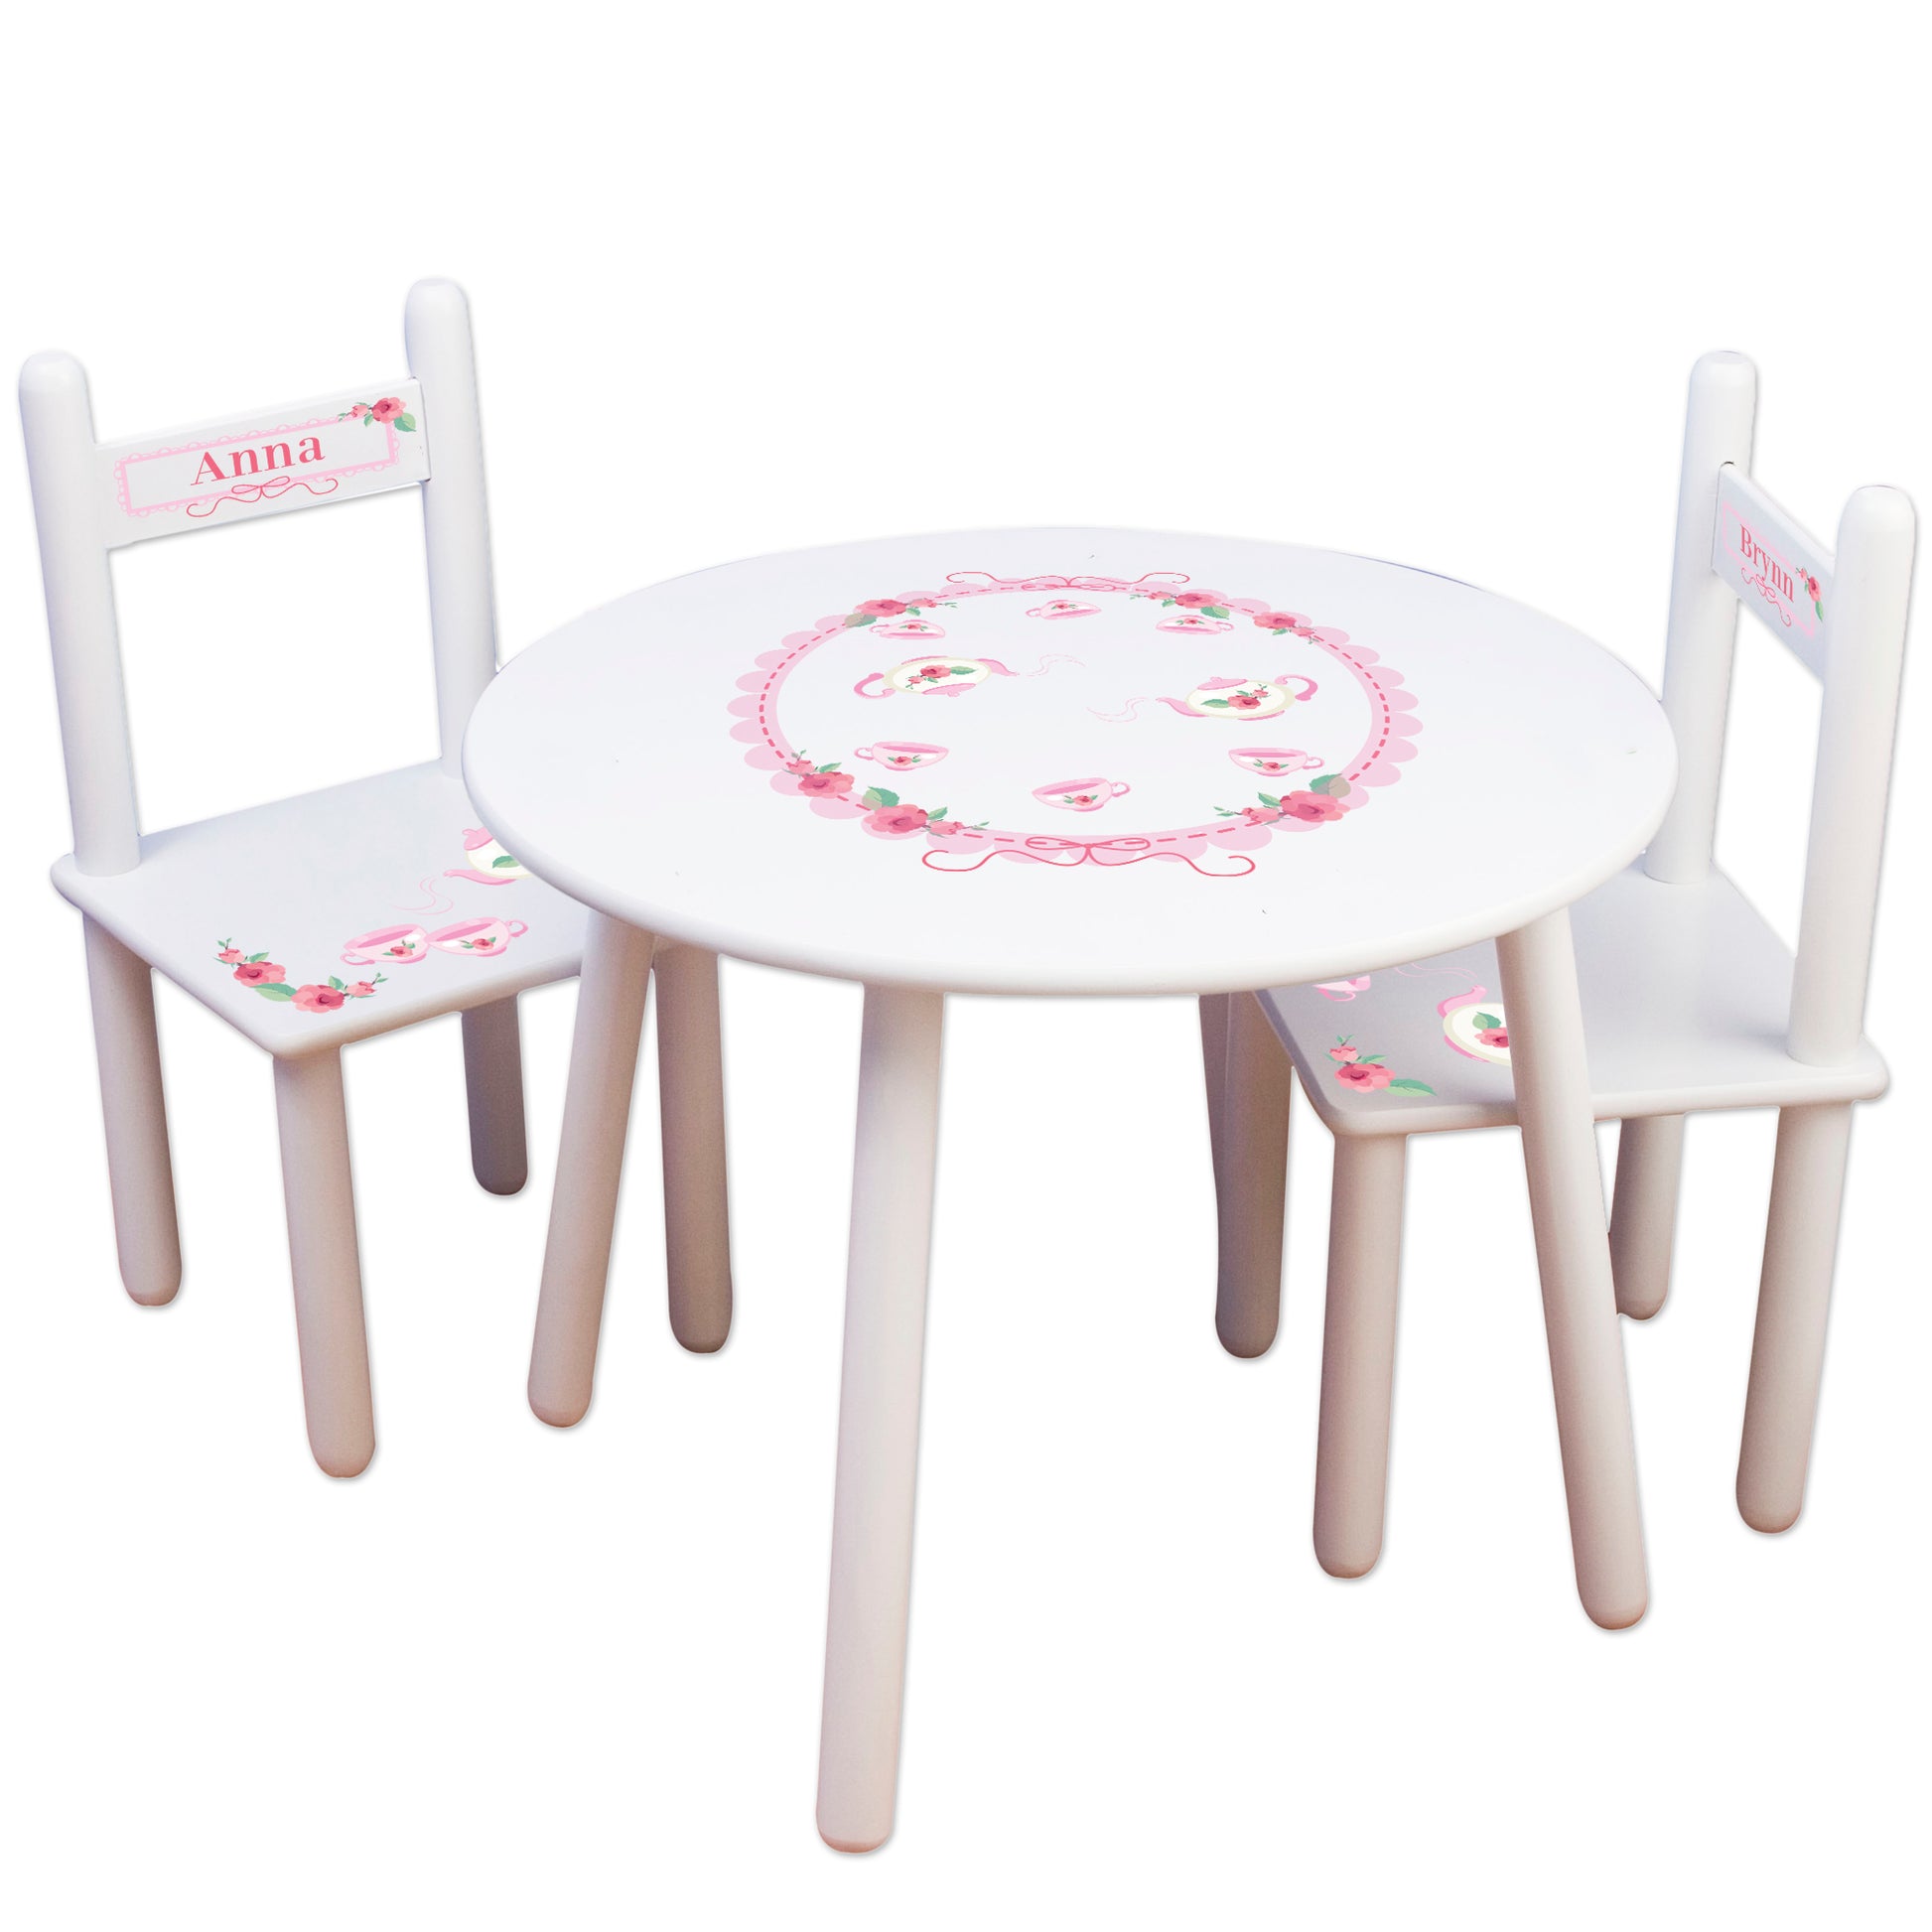 personalized tea party table chair set